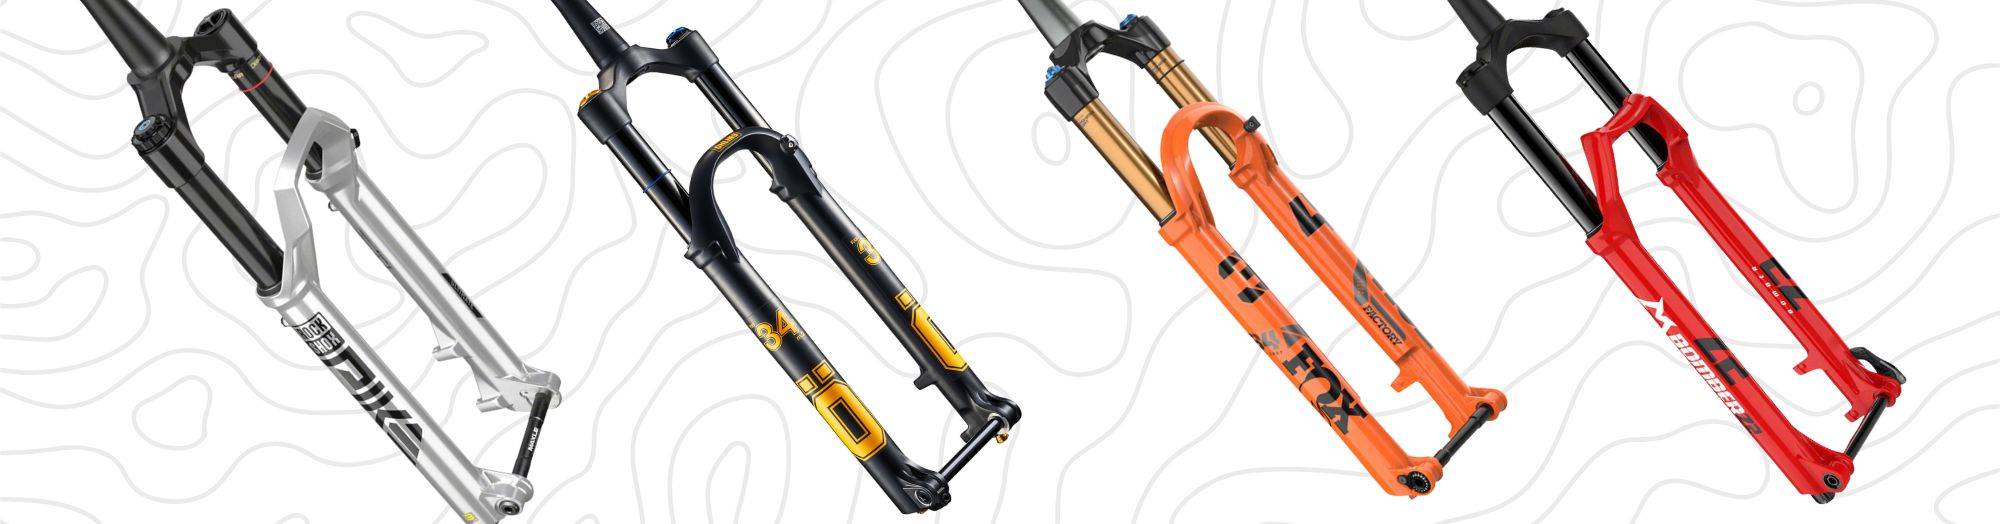 four mountain bike trail forks from rockshox marzocchi ohlins and fox